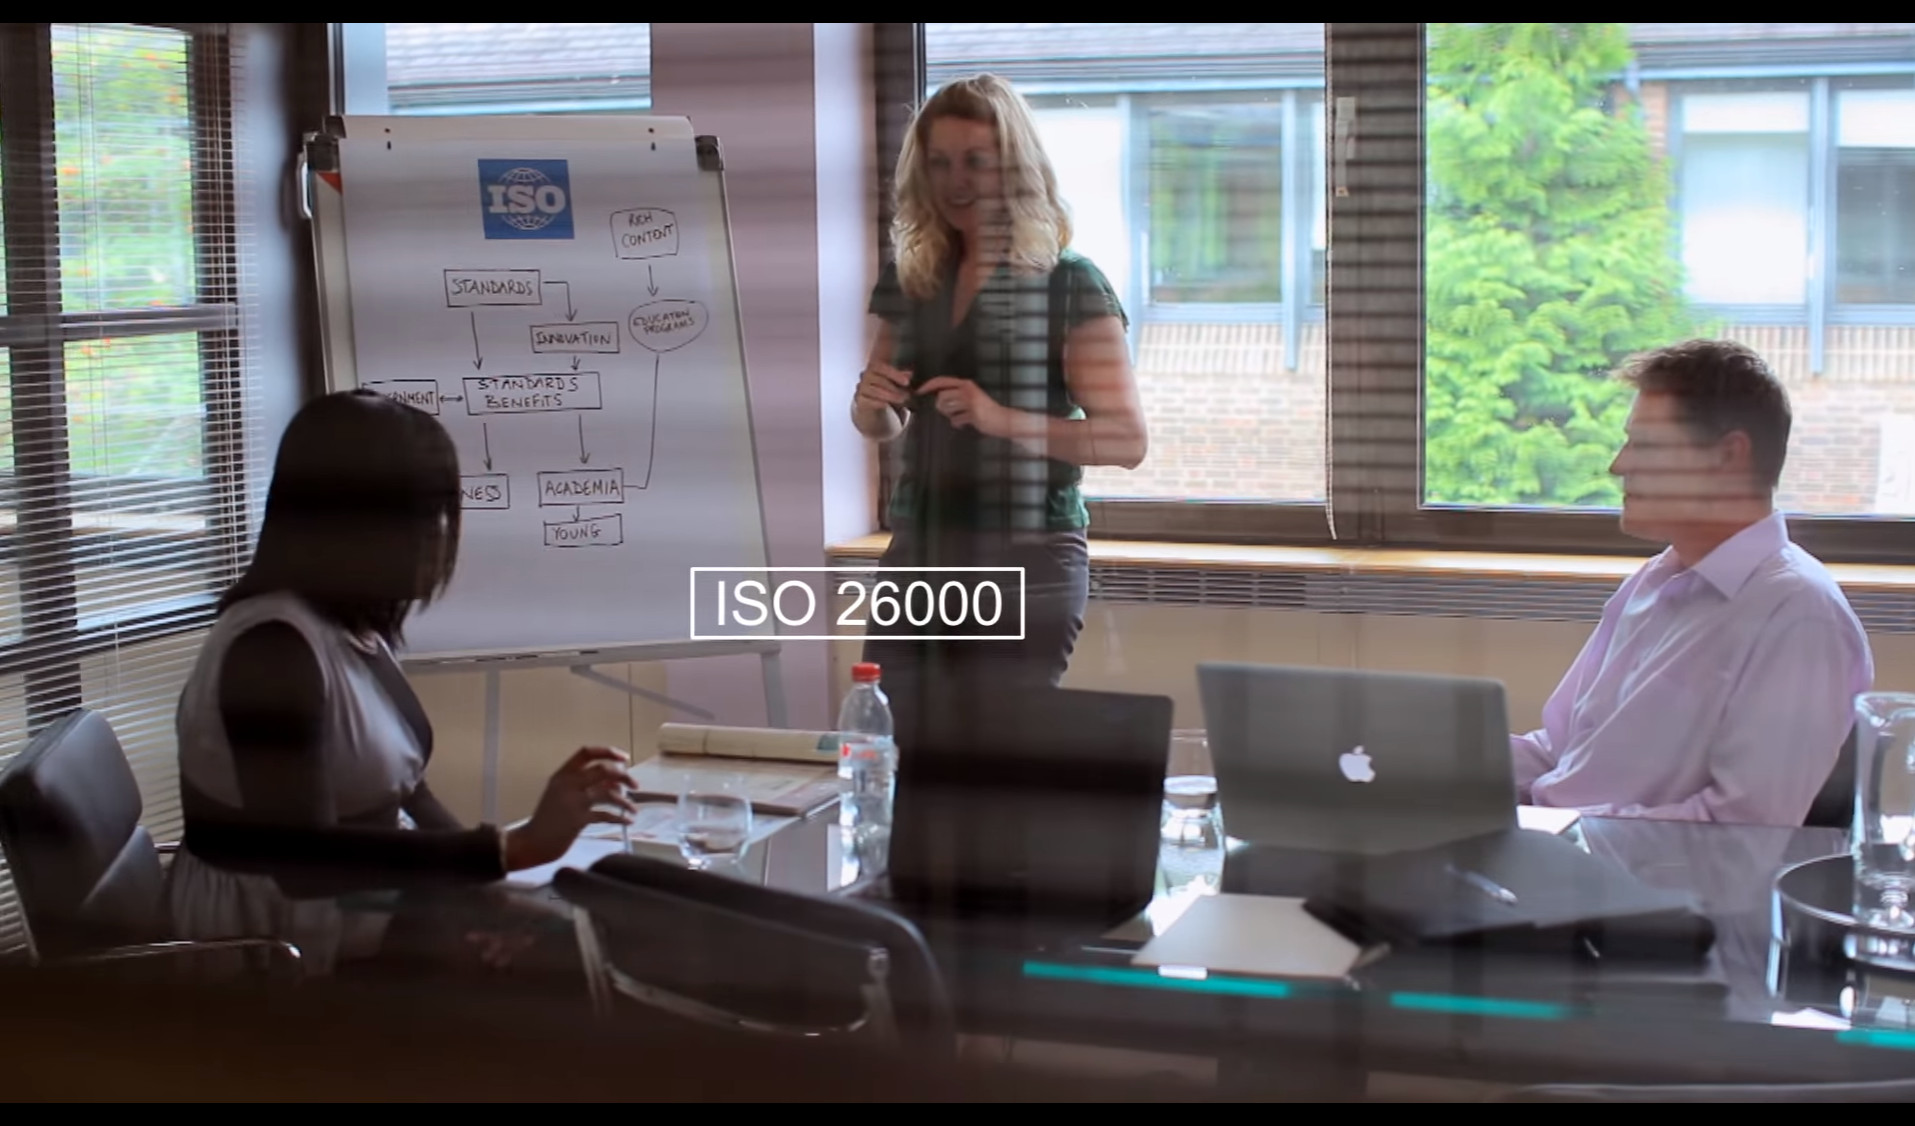 People in office look at flip-chart and discuss ISO 26000